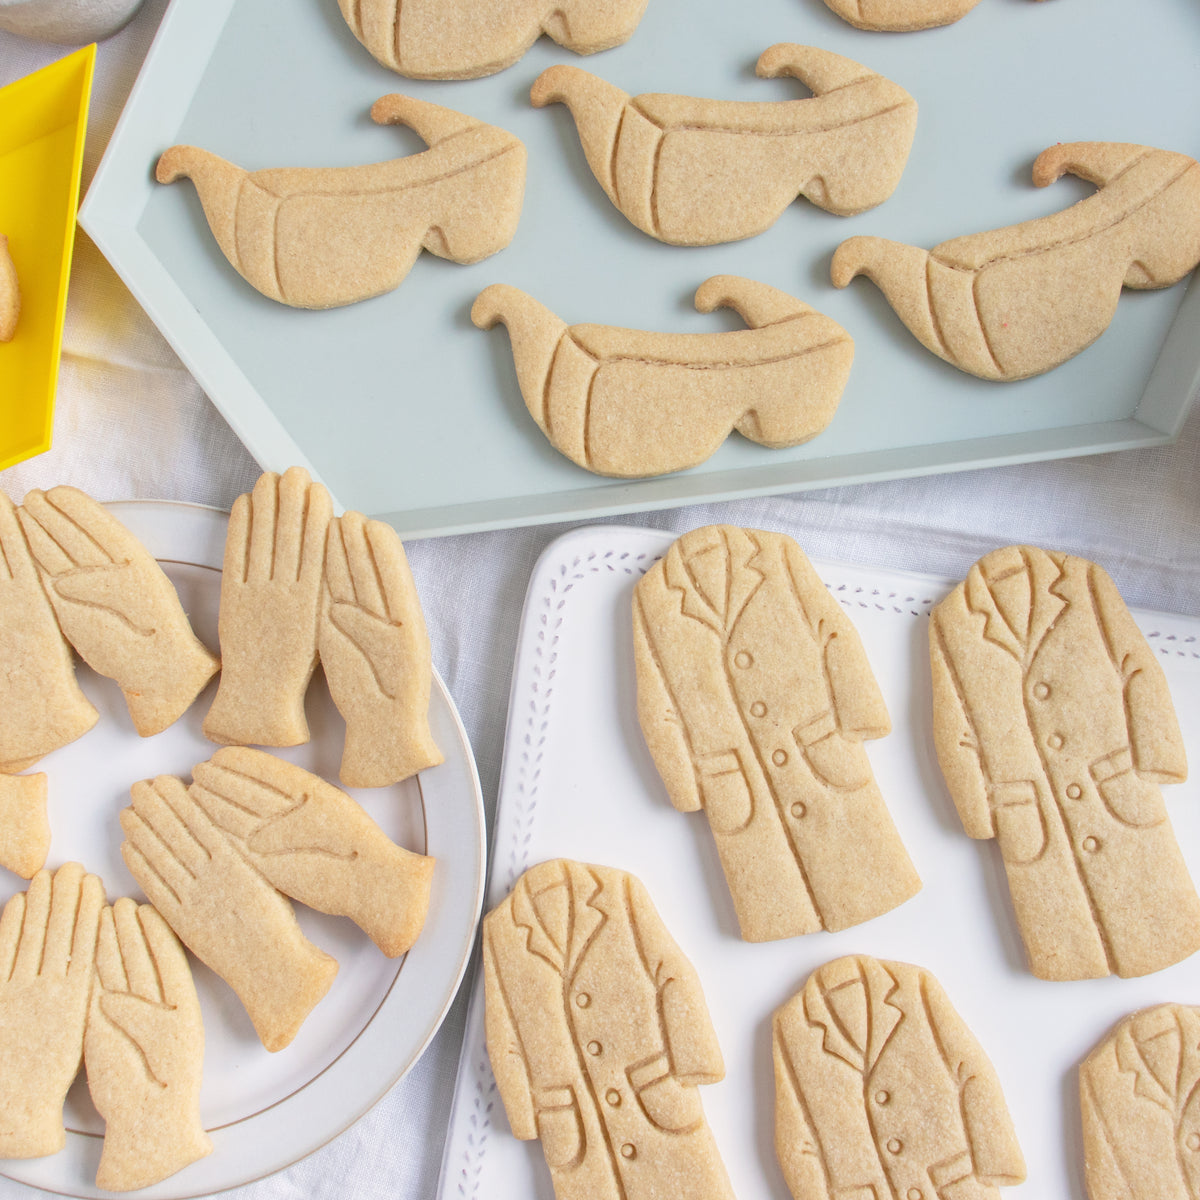 Science Laboratory PPE Cookies: Gloves, Goggles, Lab Coat